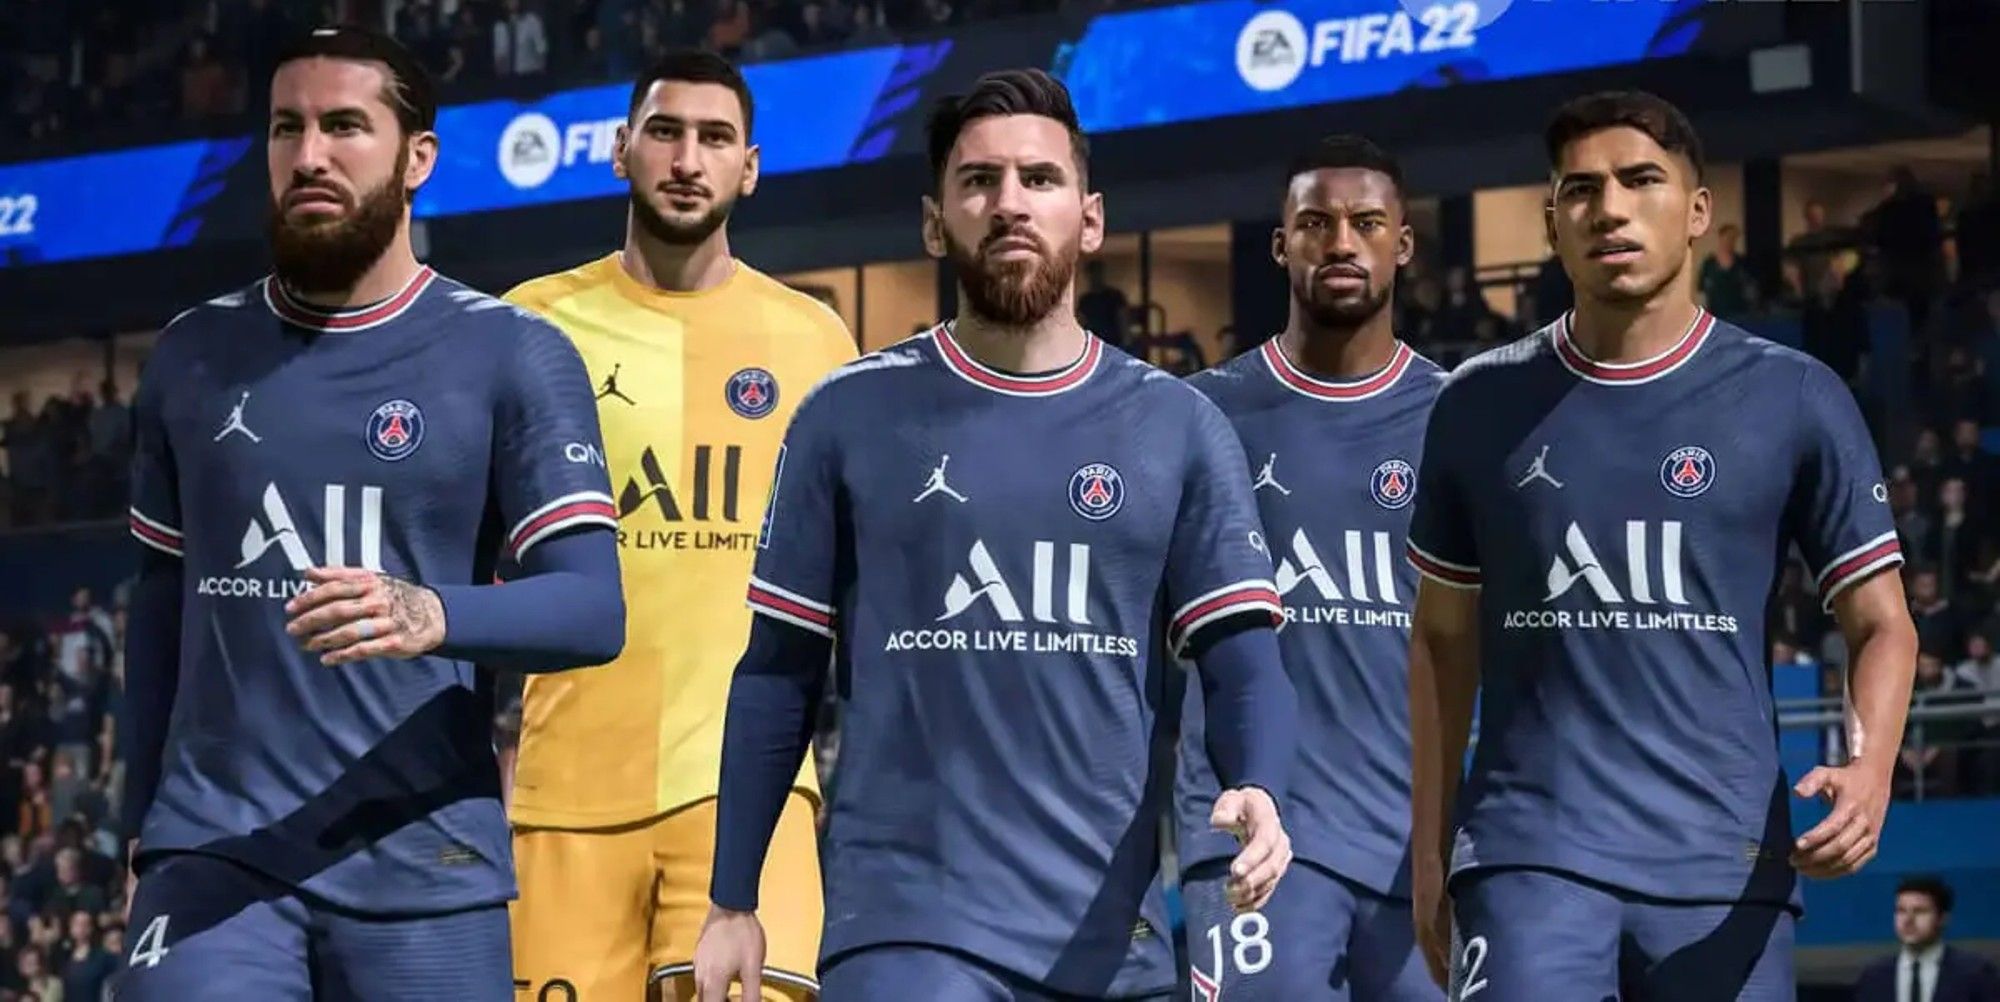 FIFA 22 Players Have Already Passed 460 Million Matches